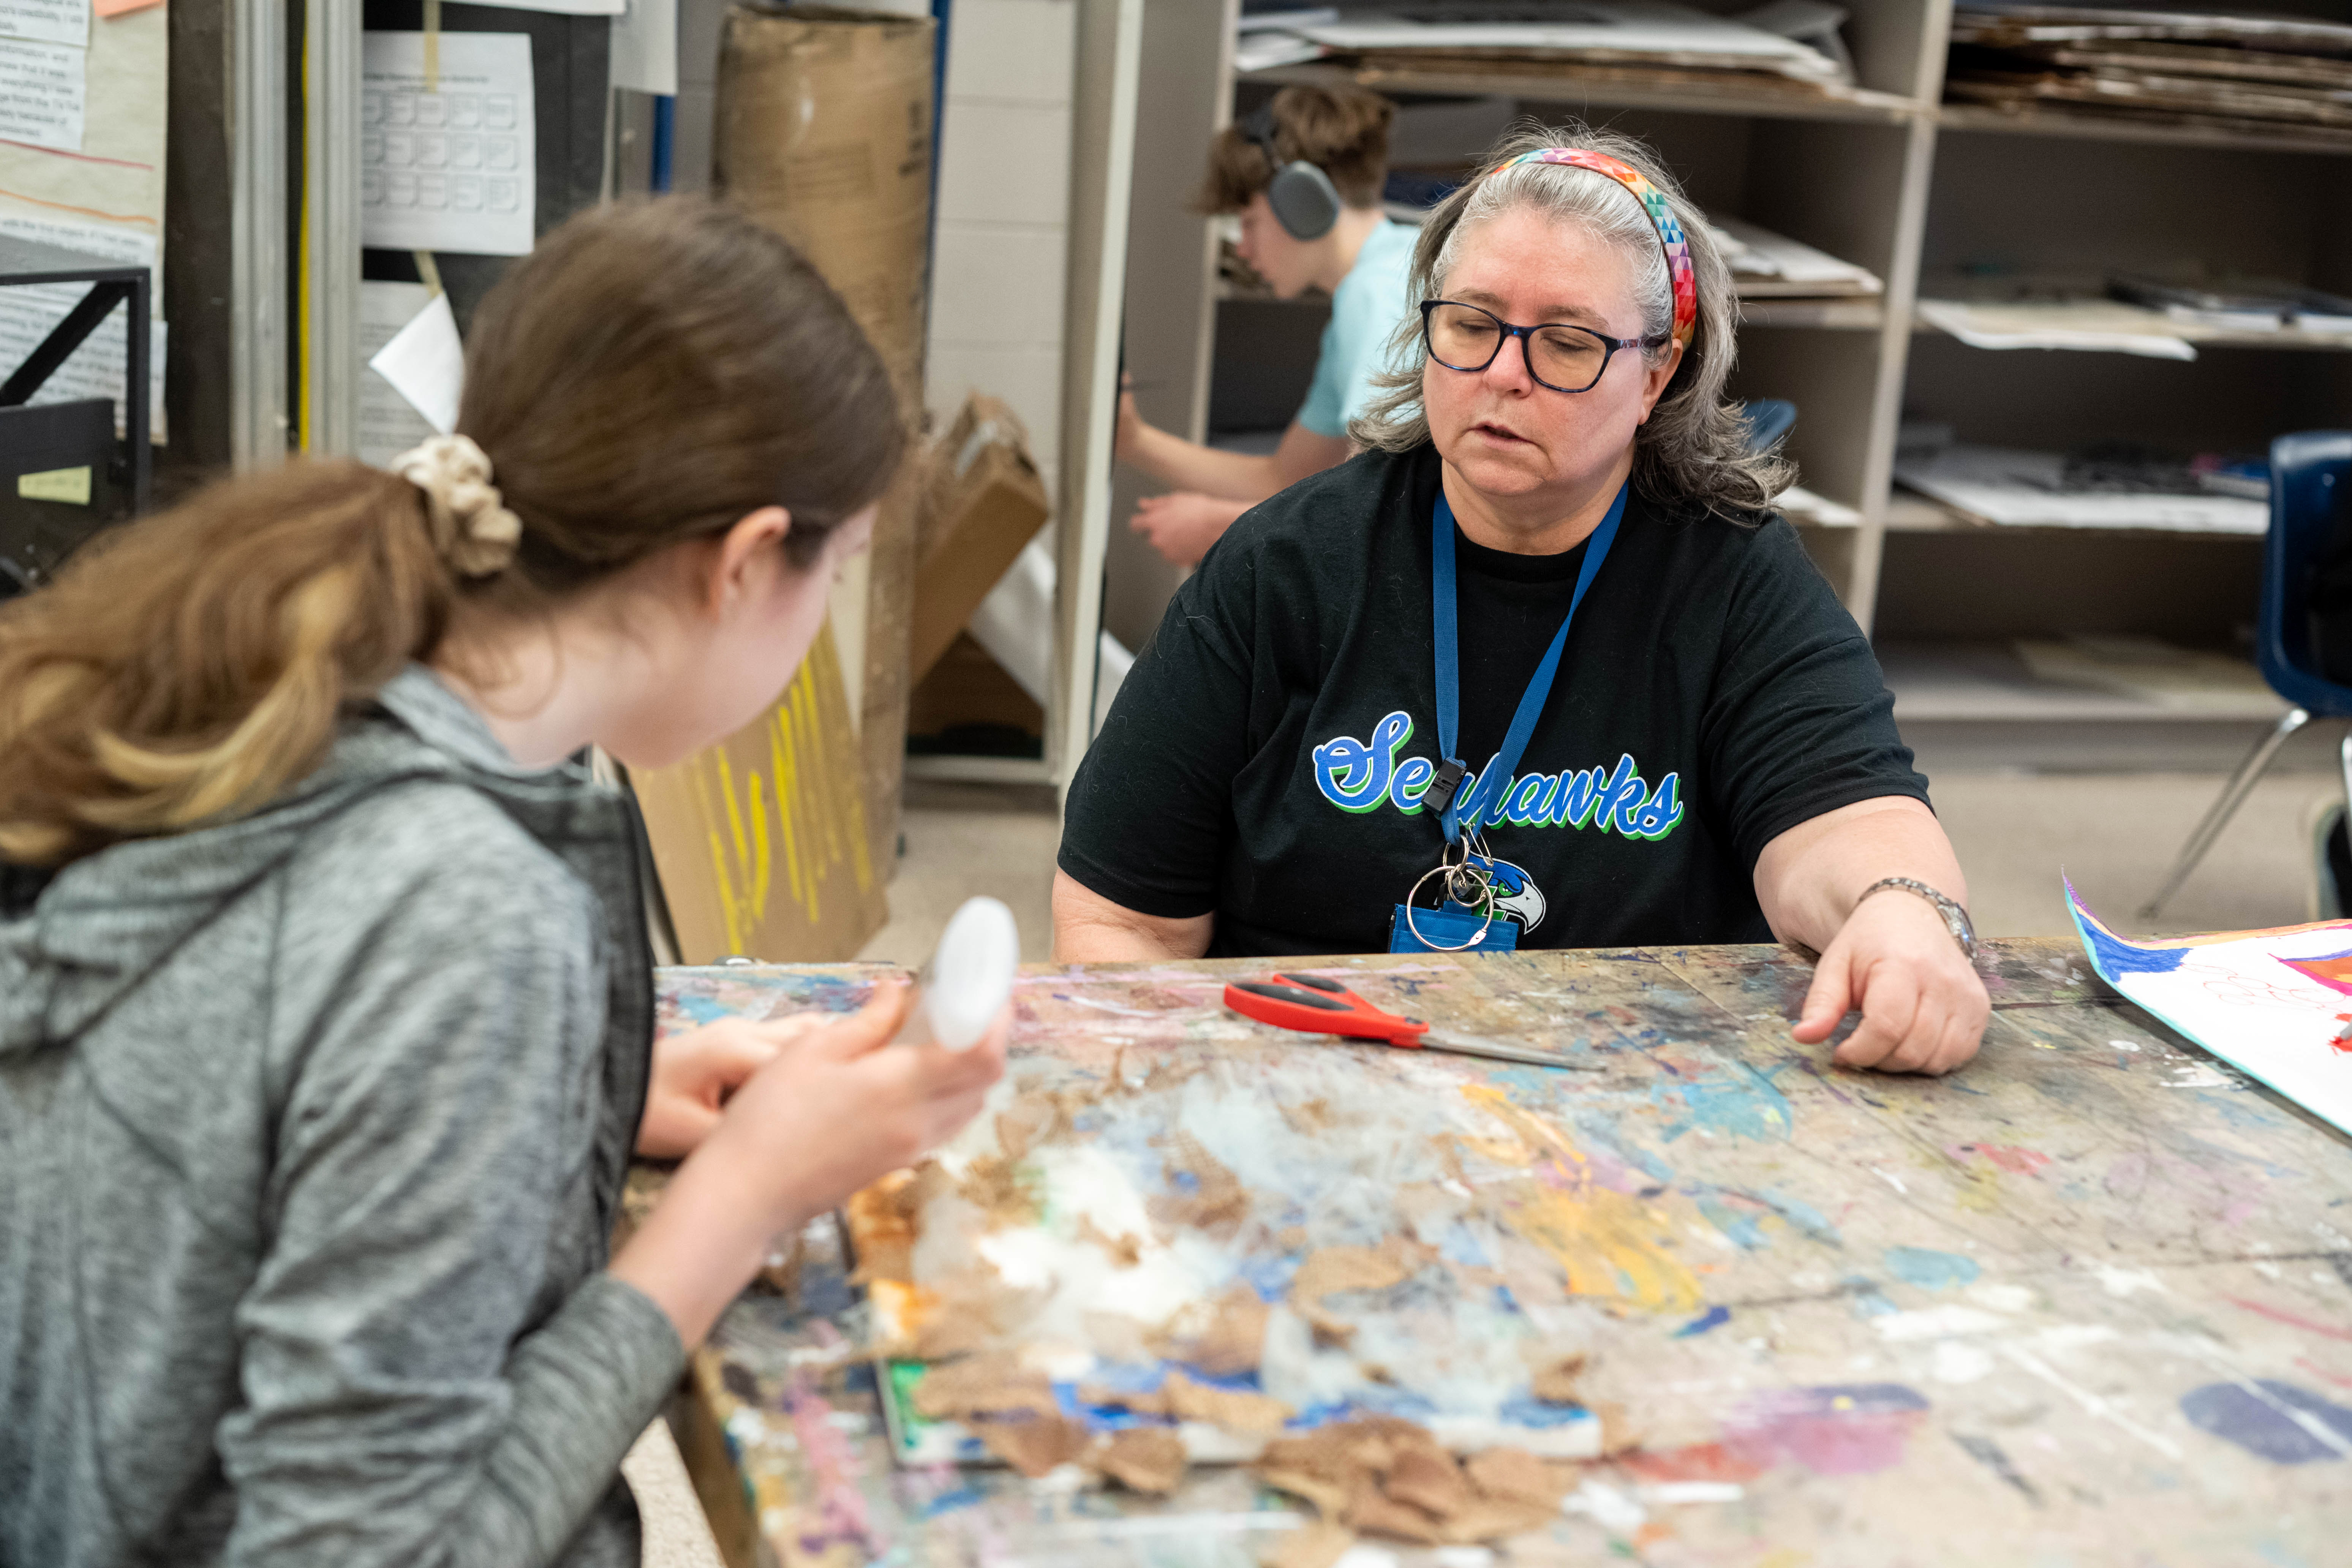 Co-teacher Claudia Harvey helps a student with her project - a series of fabrics glued onto canvas.